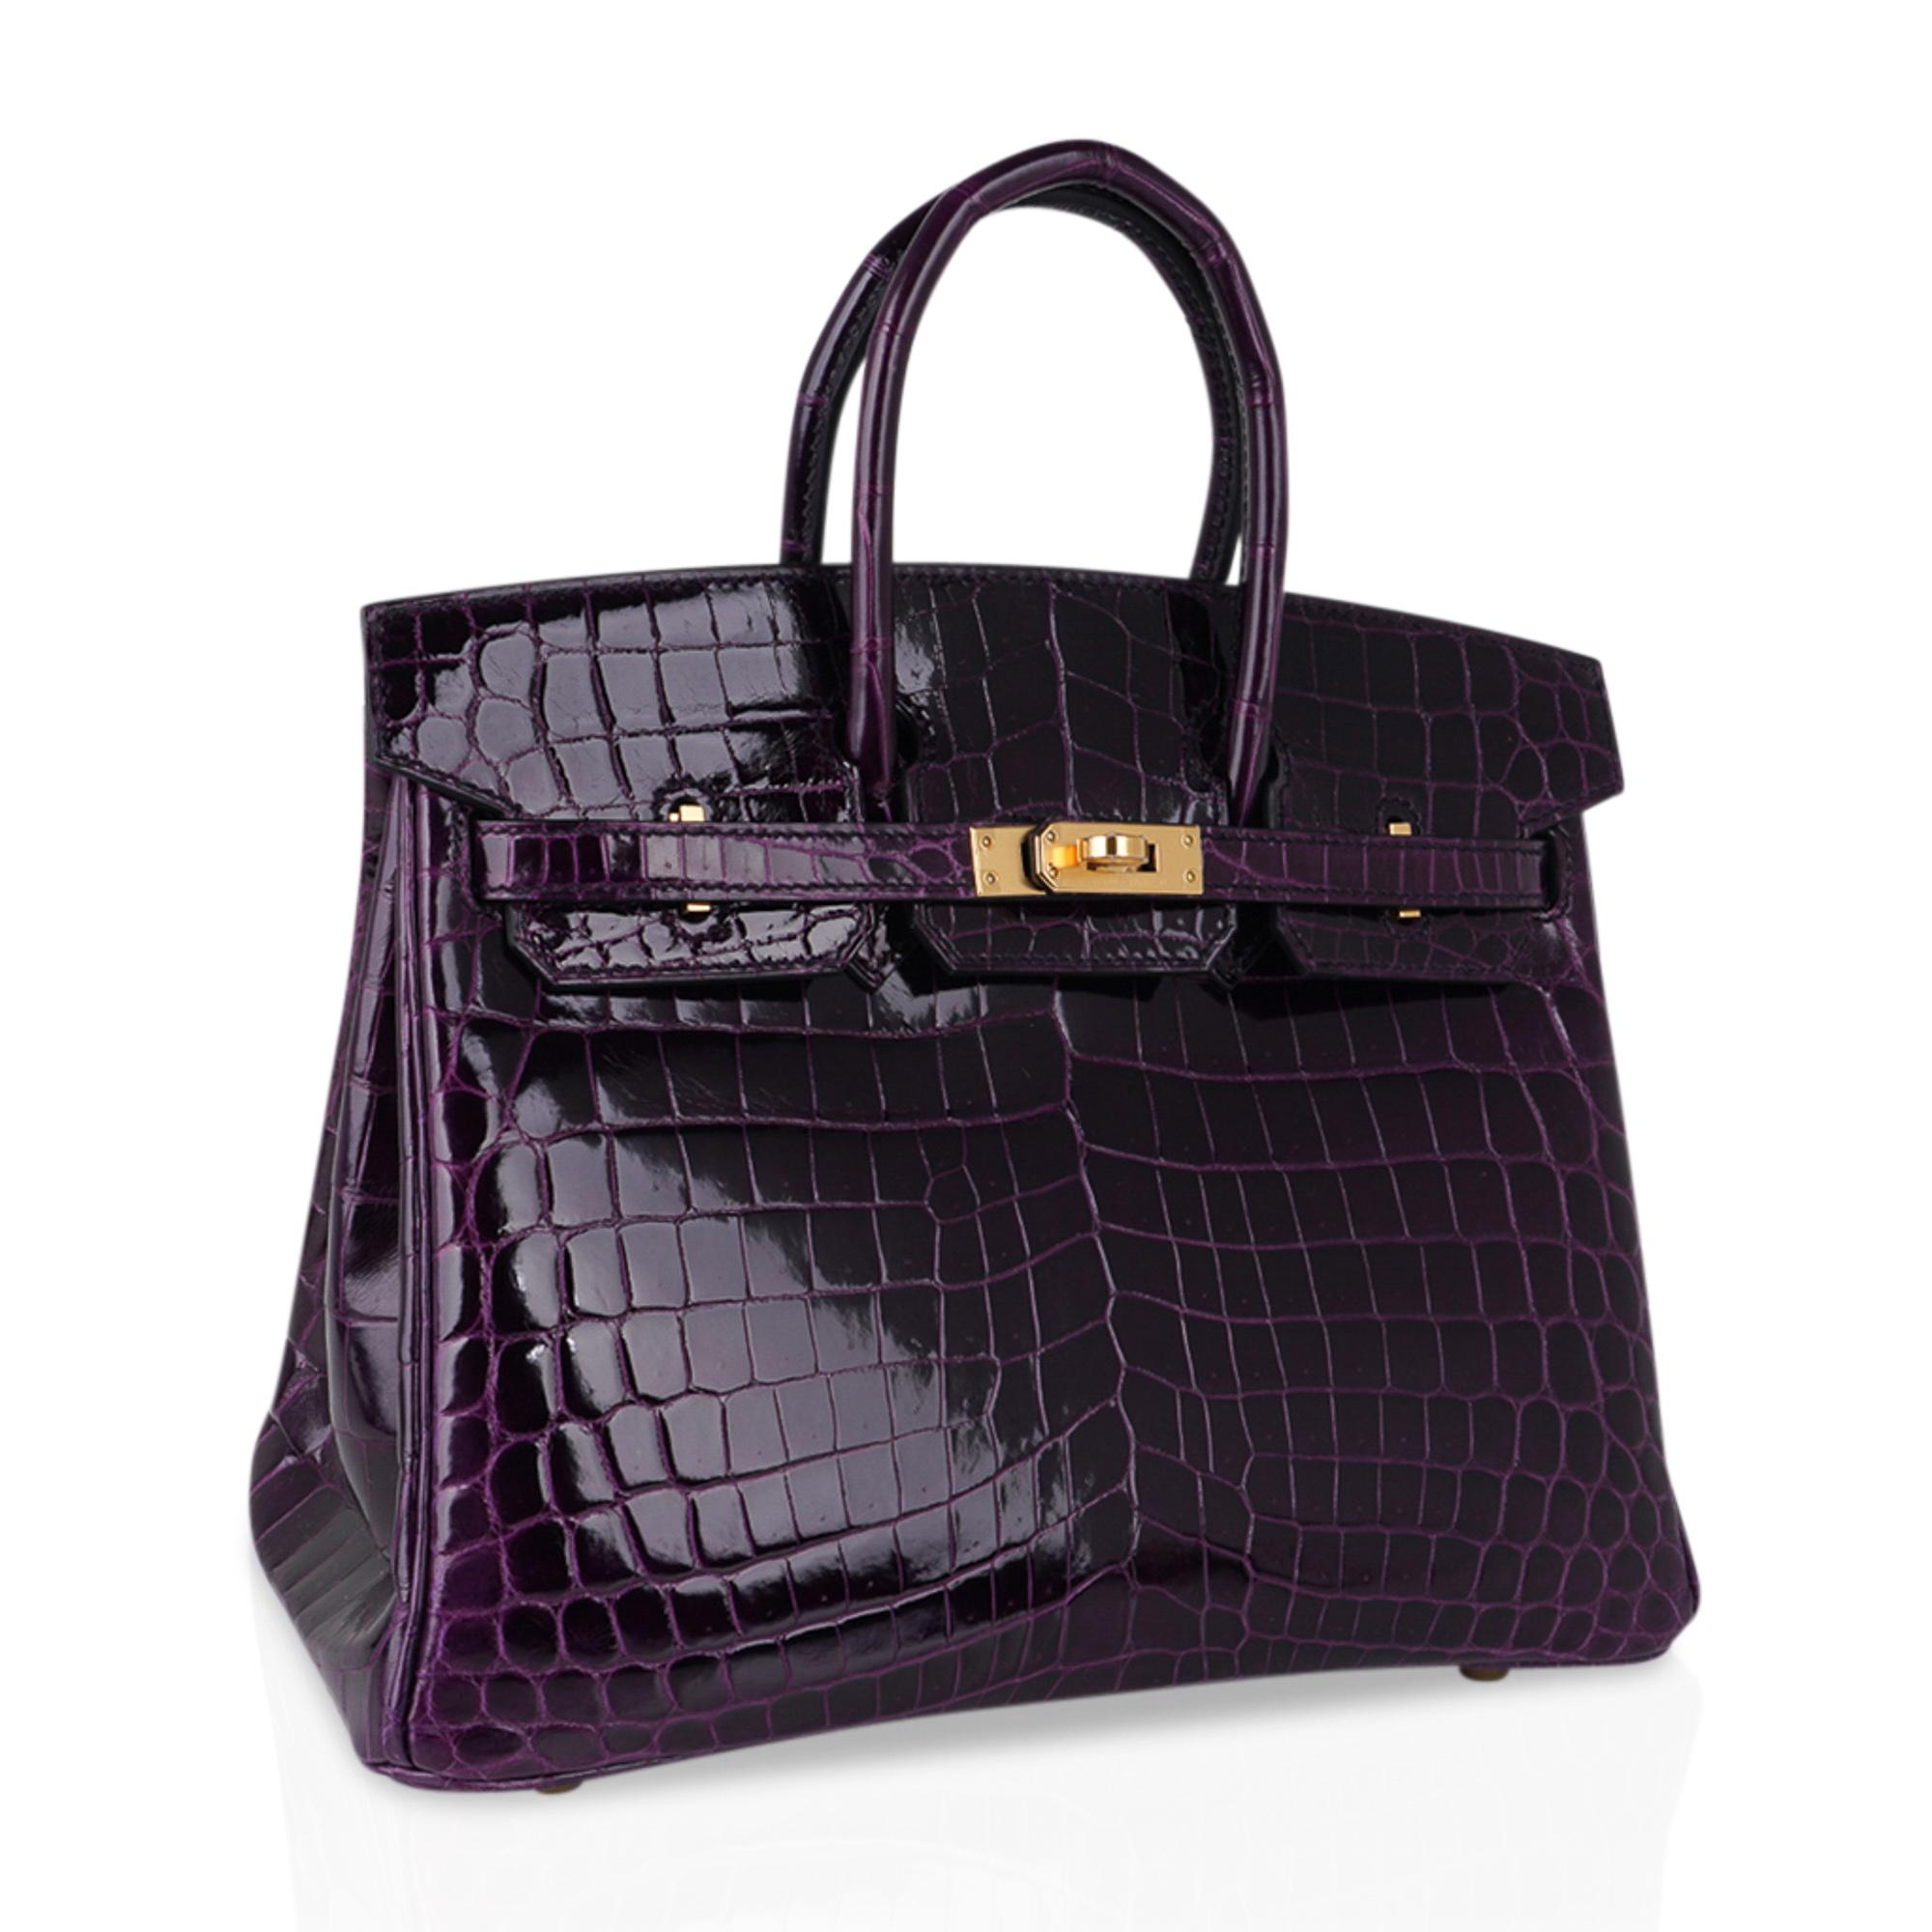 Mightychic offers an Hermes Birkin 25 bag featured in rich, saturated Aubergine crocodile. 
Rarely produced this exquisite jewel toned beauty is a must have for any Hermes aficionado.
This Hermes Birkin bag is lush with gold hardware, and is nothing